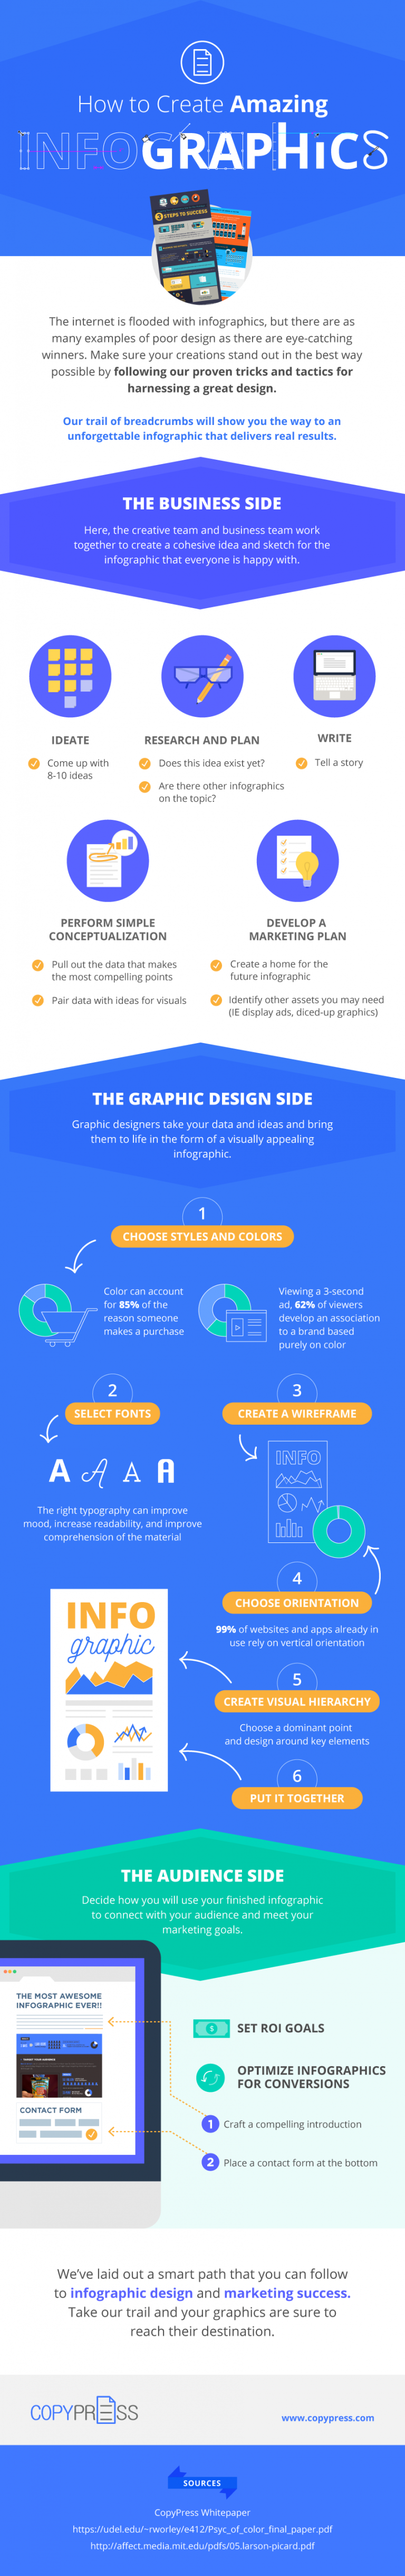 5 Steps To Creating Awesome Infographics